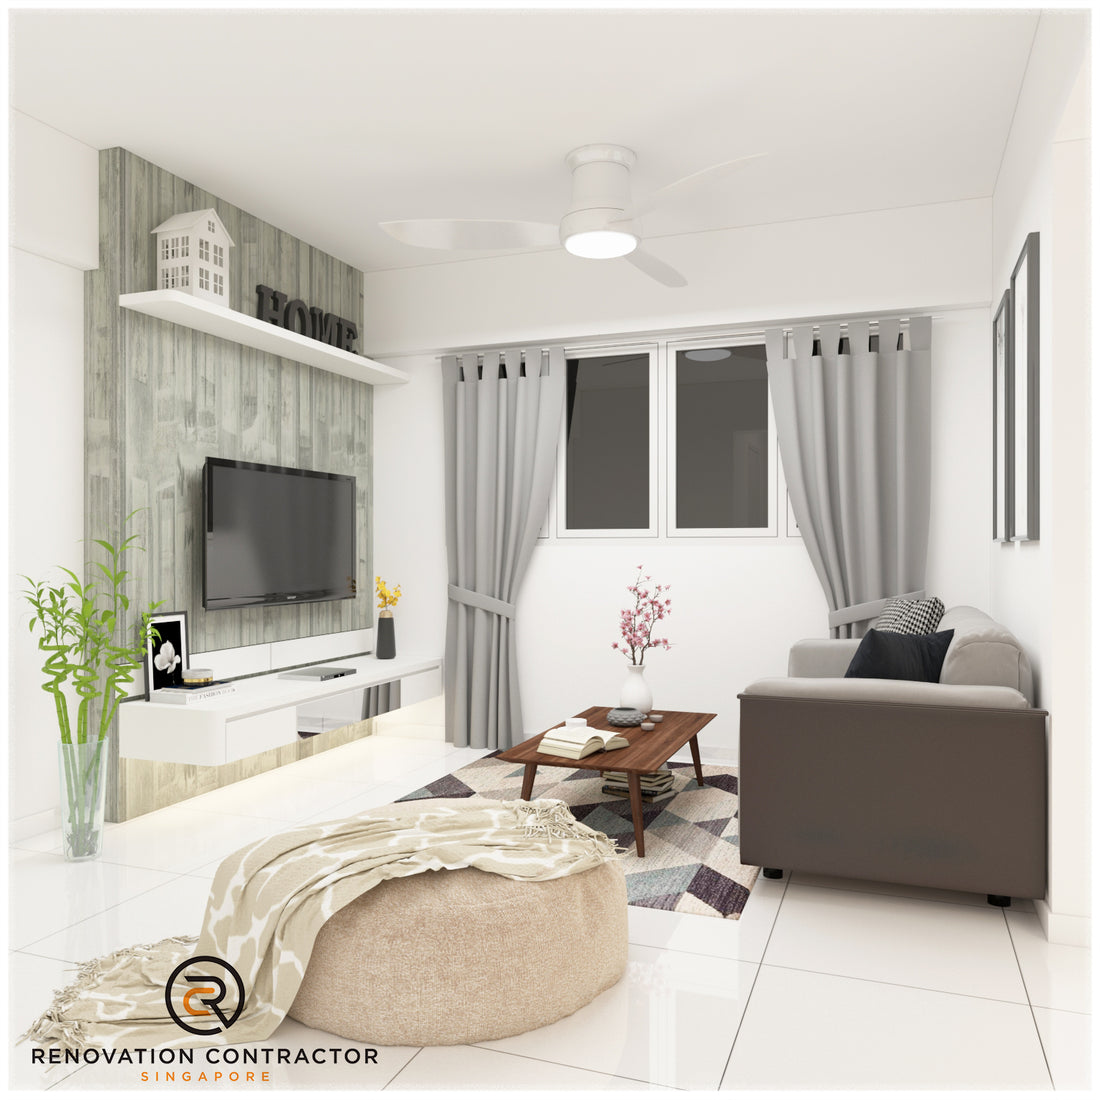 Renovation-contractor-singapore-bto-living-room-your-ideal-contractor-blog